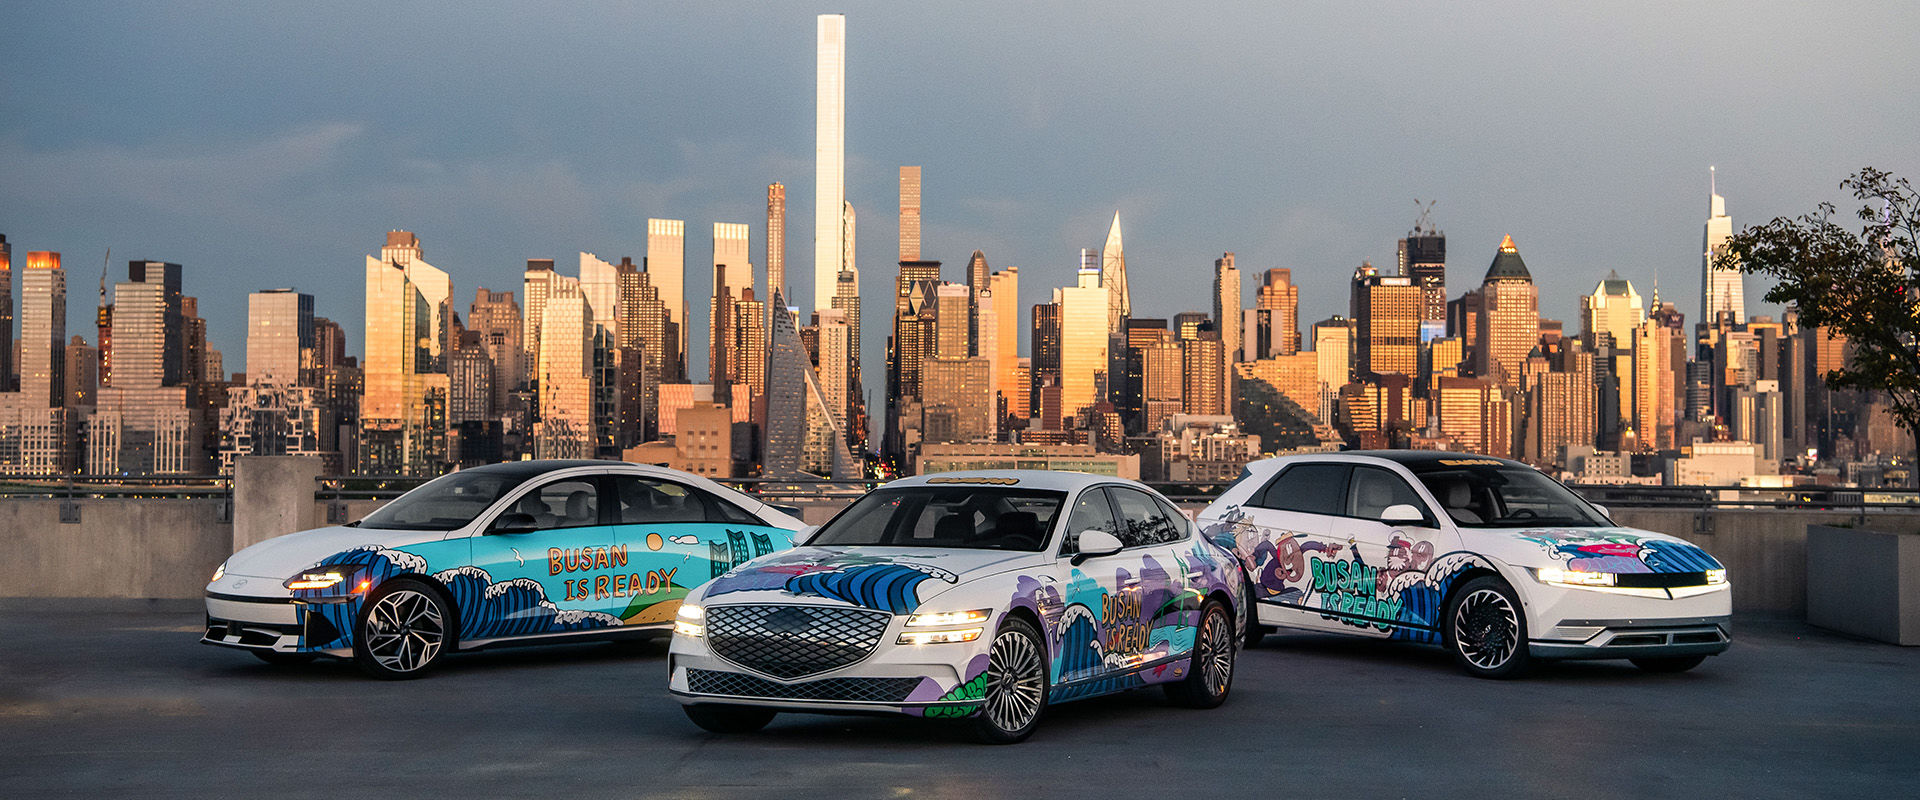 Genesis Electrified G80 sedan (center), Hyundai IONIQ 6 (left) and IONIQ 5 (right) show graffiti artwork and the slogan to promote Busan's bid to host the 2030 World Expo at Hudson County, New Jersey, with a New York City skyline in the background